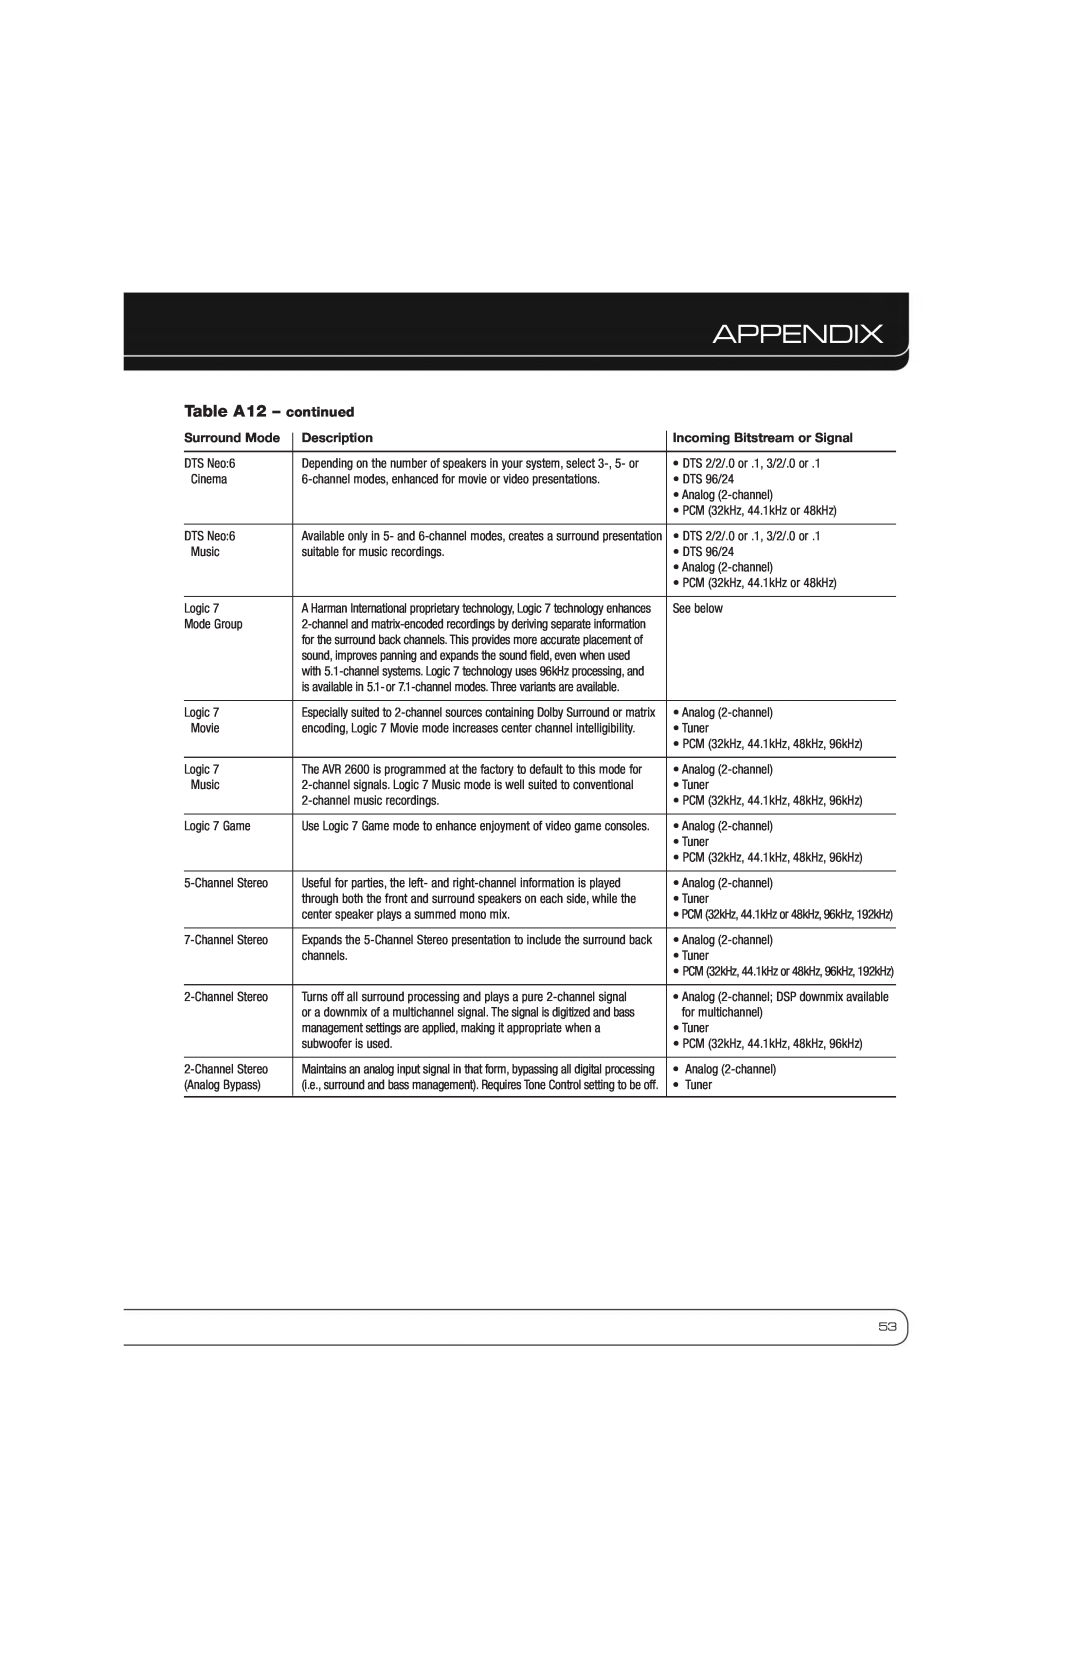 Harman AVR 2600 owner manual Appendix, Table A12 - continued, DTS Neo 